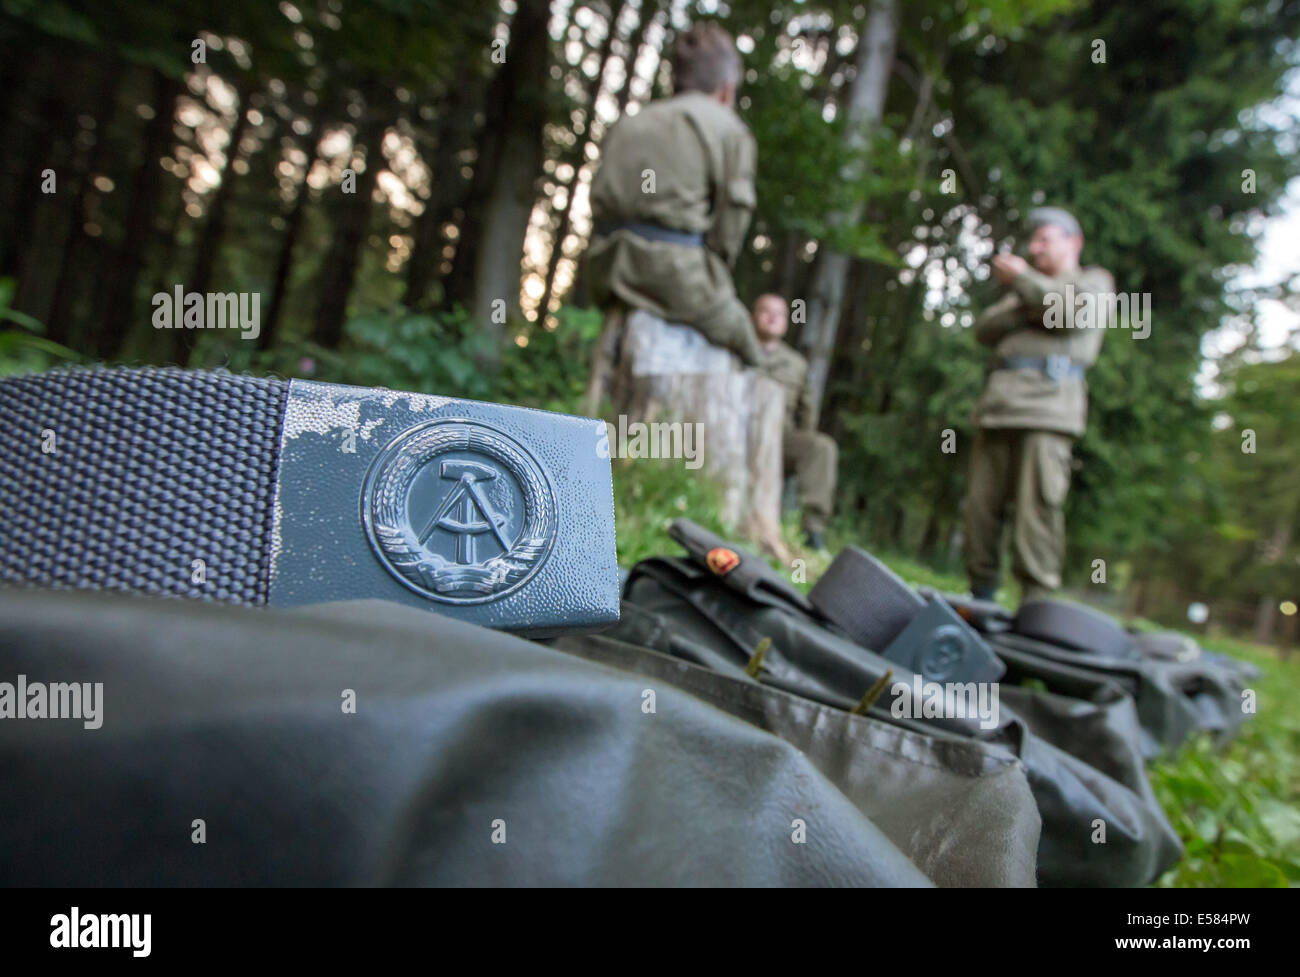 Visitors wear uniforms of the former National People's Army (NPA) of the German Democratic Republic (GDR) during the reenactment of a military exercise at the Bunker Museum Frauenwald in Frauenwald, Germany, 19 July 2014. The private museum offers a trip back in time including an overnight stay in the former bunker complex of the GDR's Ministry for State Security (Stasi). The bunker complex is 3,600 square metres in size and was supposed to allow the district command Suhl to continue operating in case of war. Photo: Michael Reichel /ZB Stock Photo